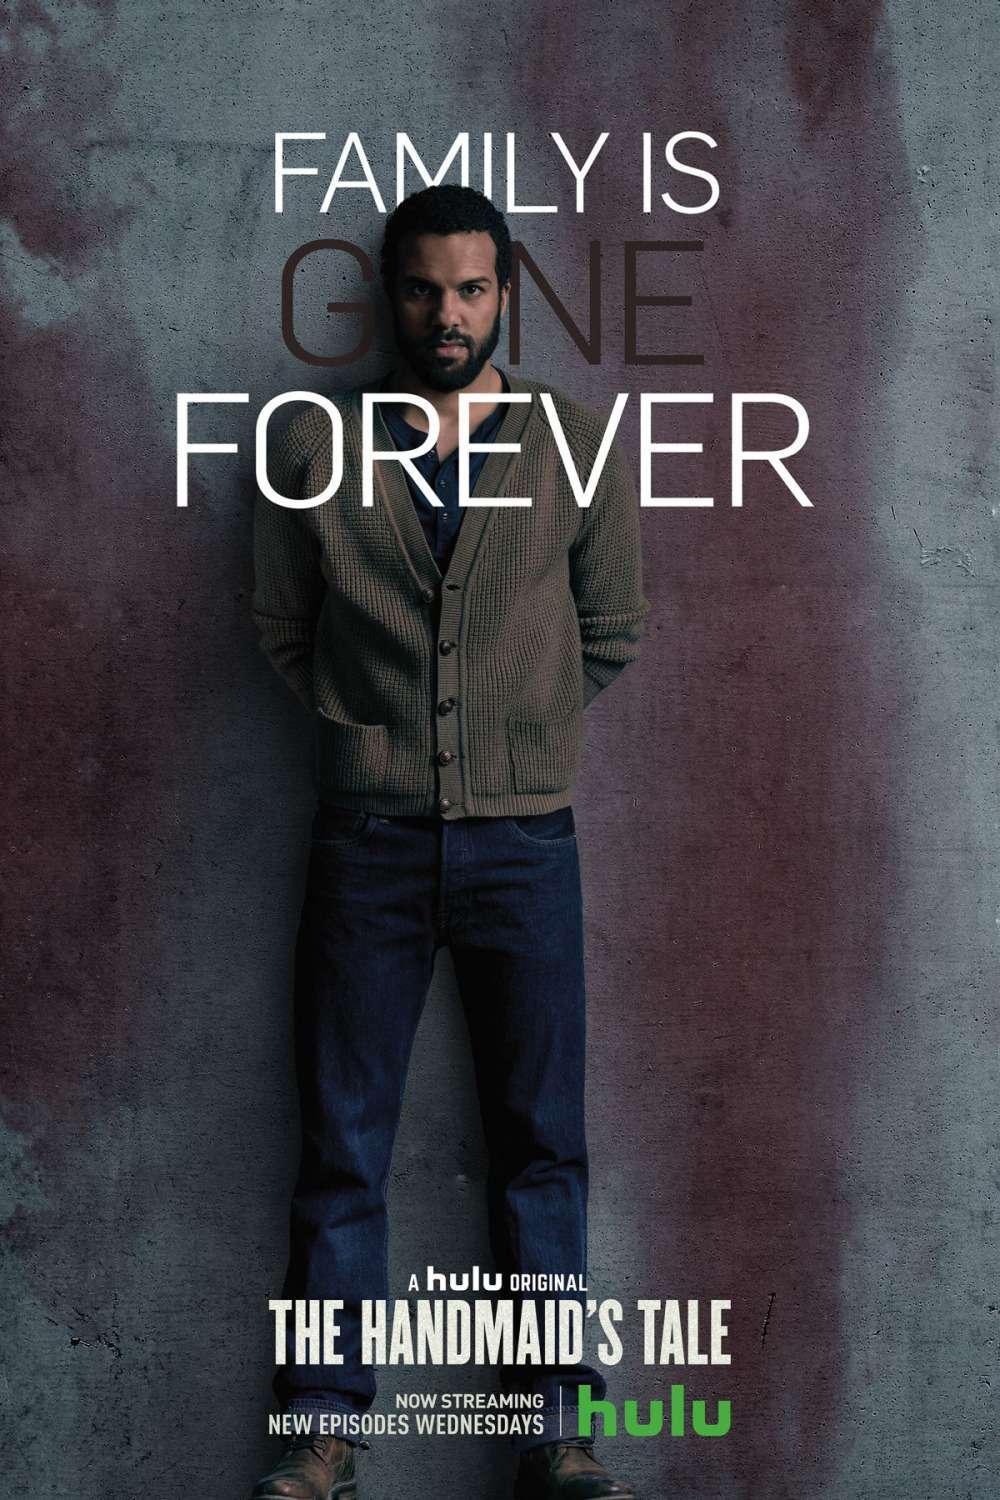 S1 US Character Poster #7